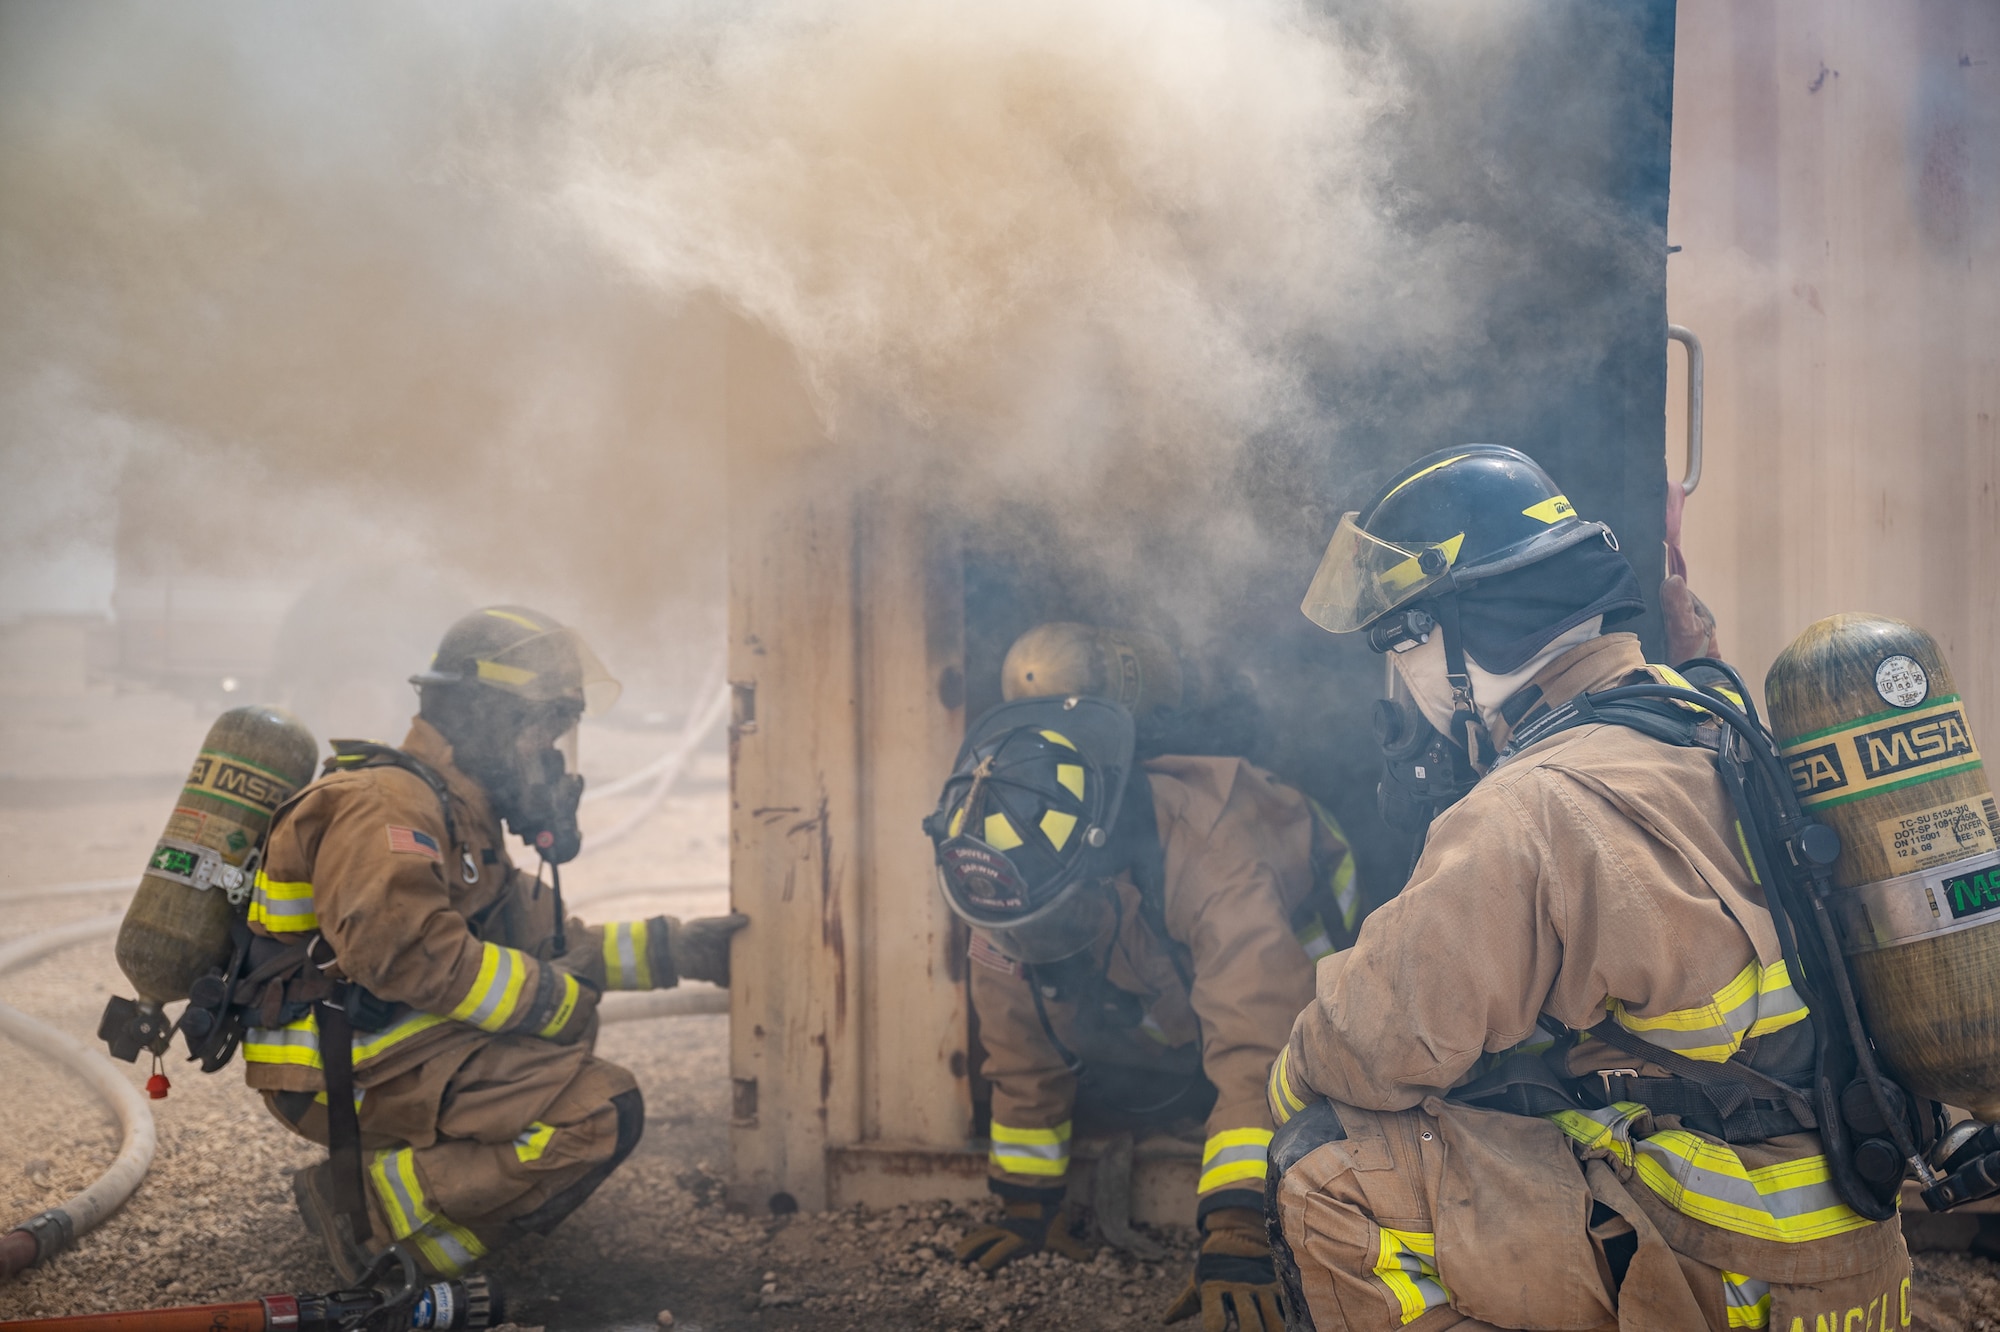 Two 332d Expeditionary Civil Engineer Squadron firefighters ensure students egress properly from the flashover trainer during live-fire flashover training at an undisclosed location in Southwest Asia, April 30, 2022. In addition to ensuring proper egress procedures are followed, the two firefighters also monitor the flashover trainer for safety concerns such as fire flare-ups. (U.S. Air Force photo by Master Sgt. Christopher Parr)